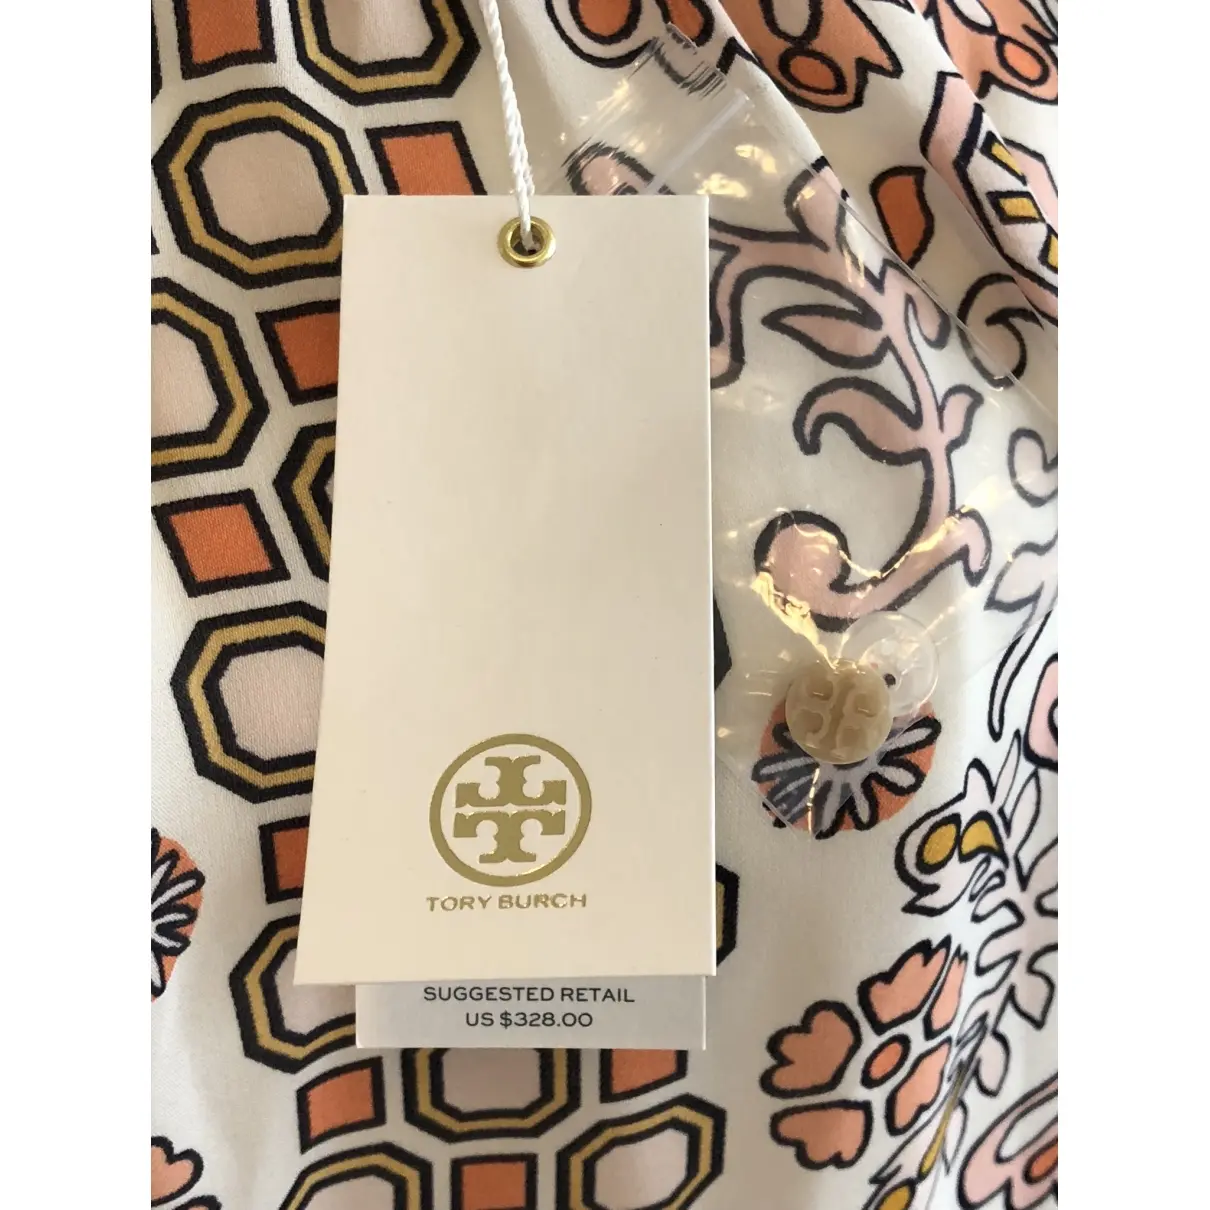 Tory Burch Silk blouse for sale